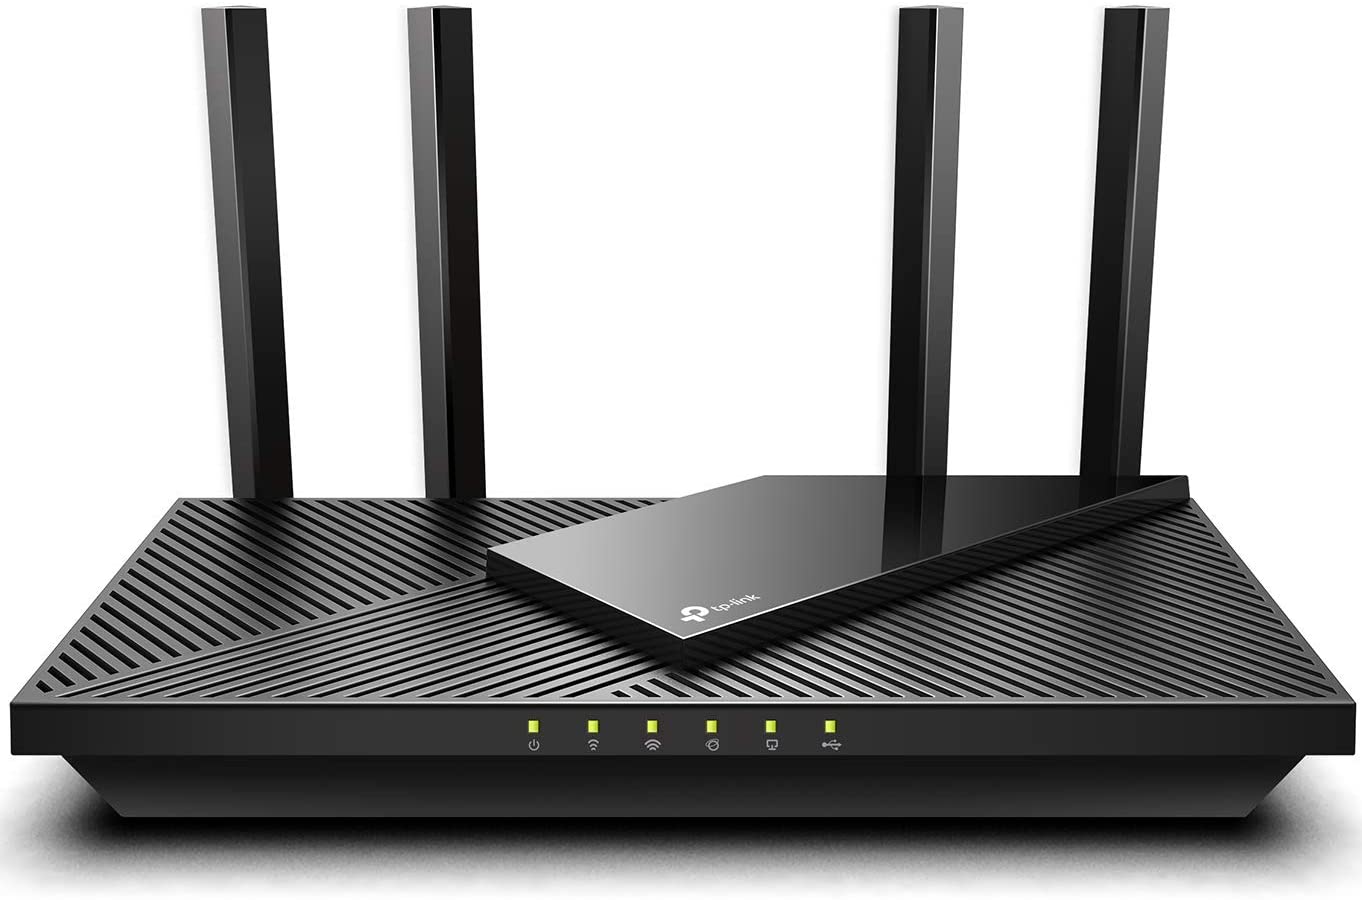 TP-Link WiFi 6 Router AX1800 Smart WiFi Router (Archer AX21) – Dual Band Gigabit Router $69.99